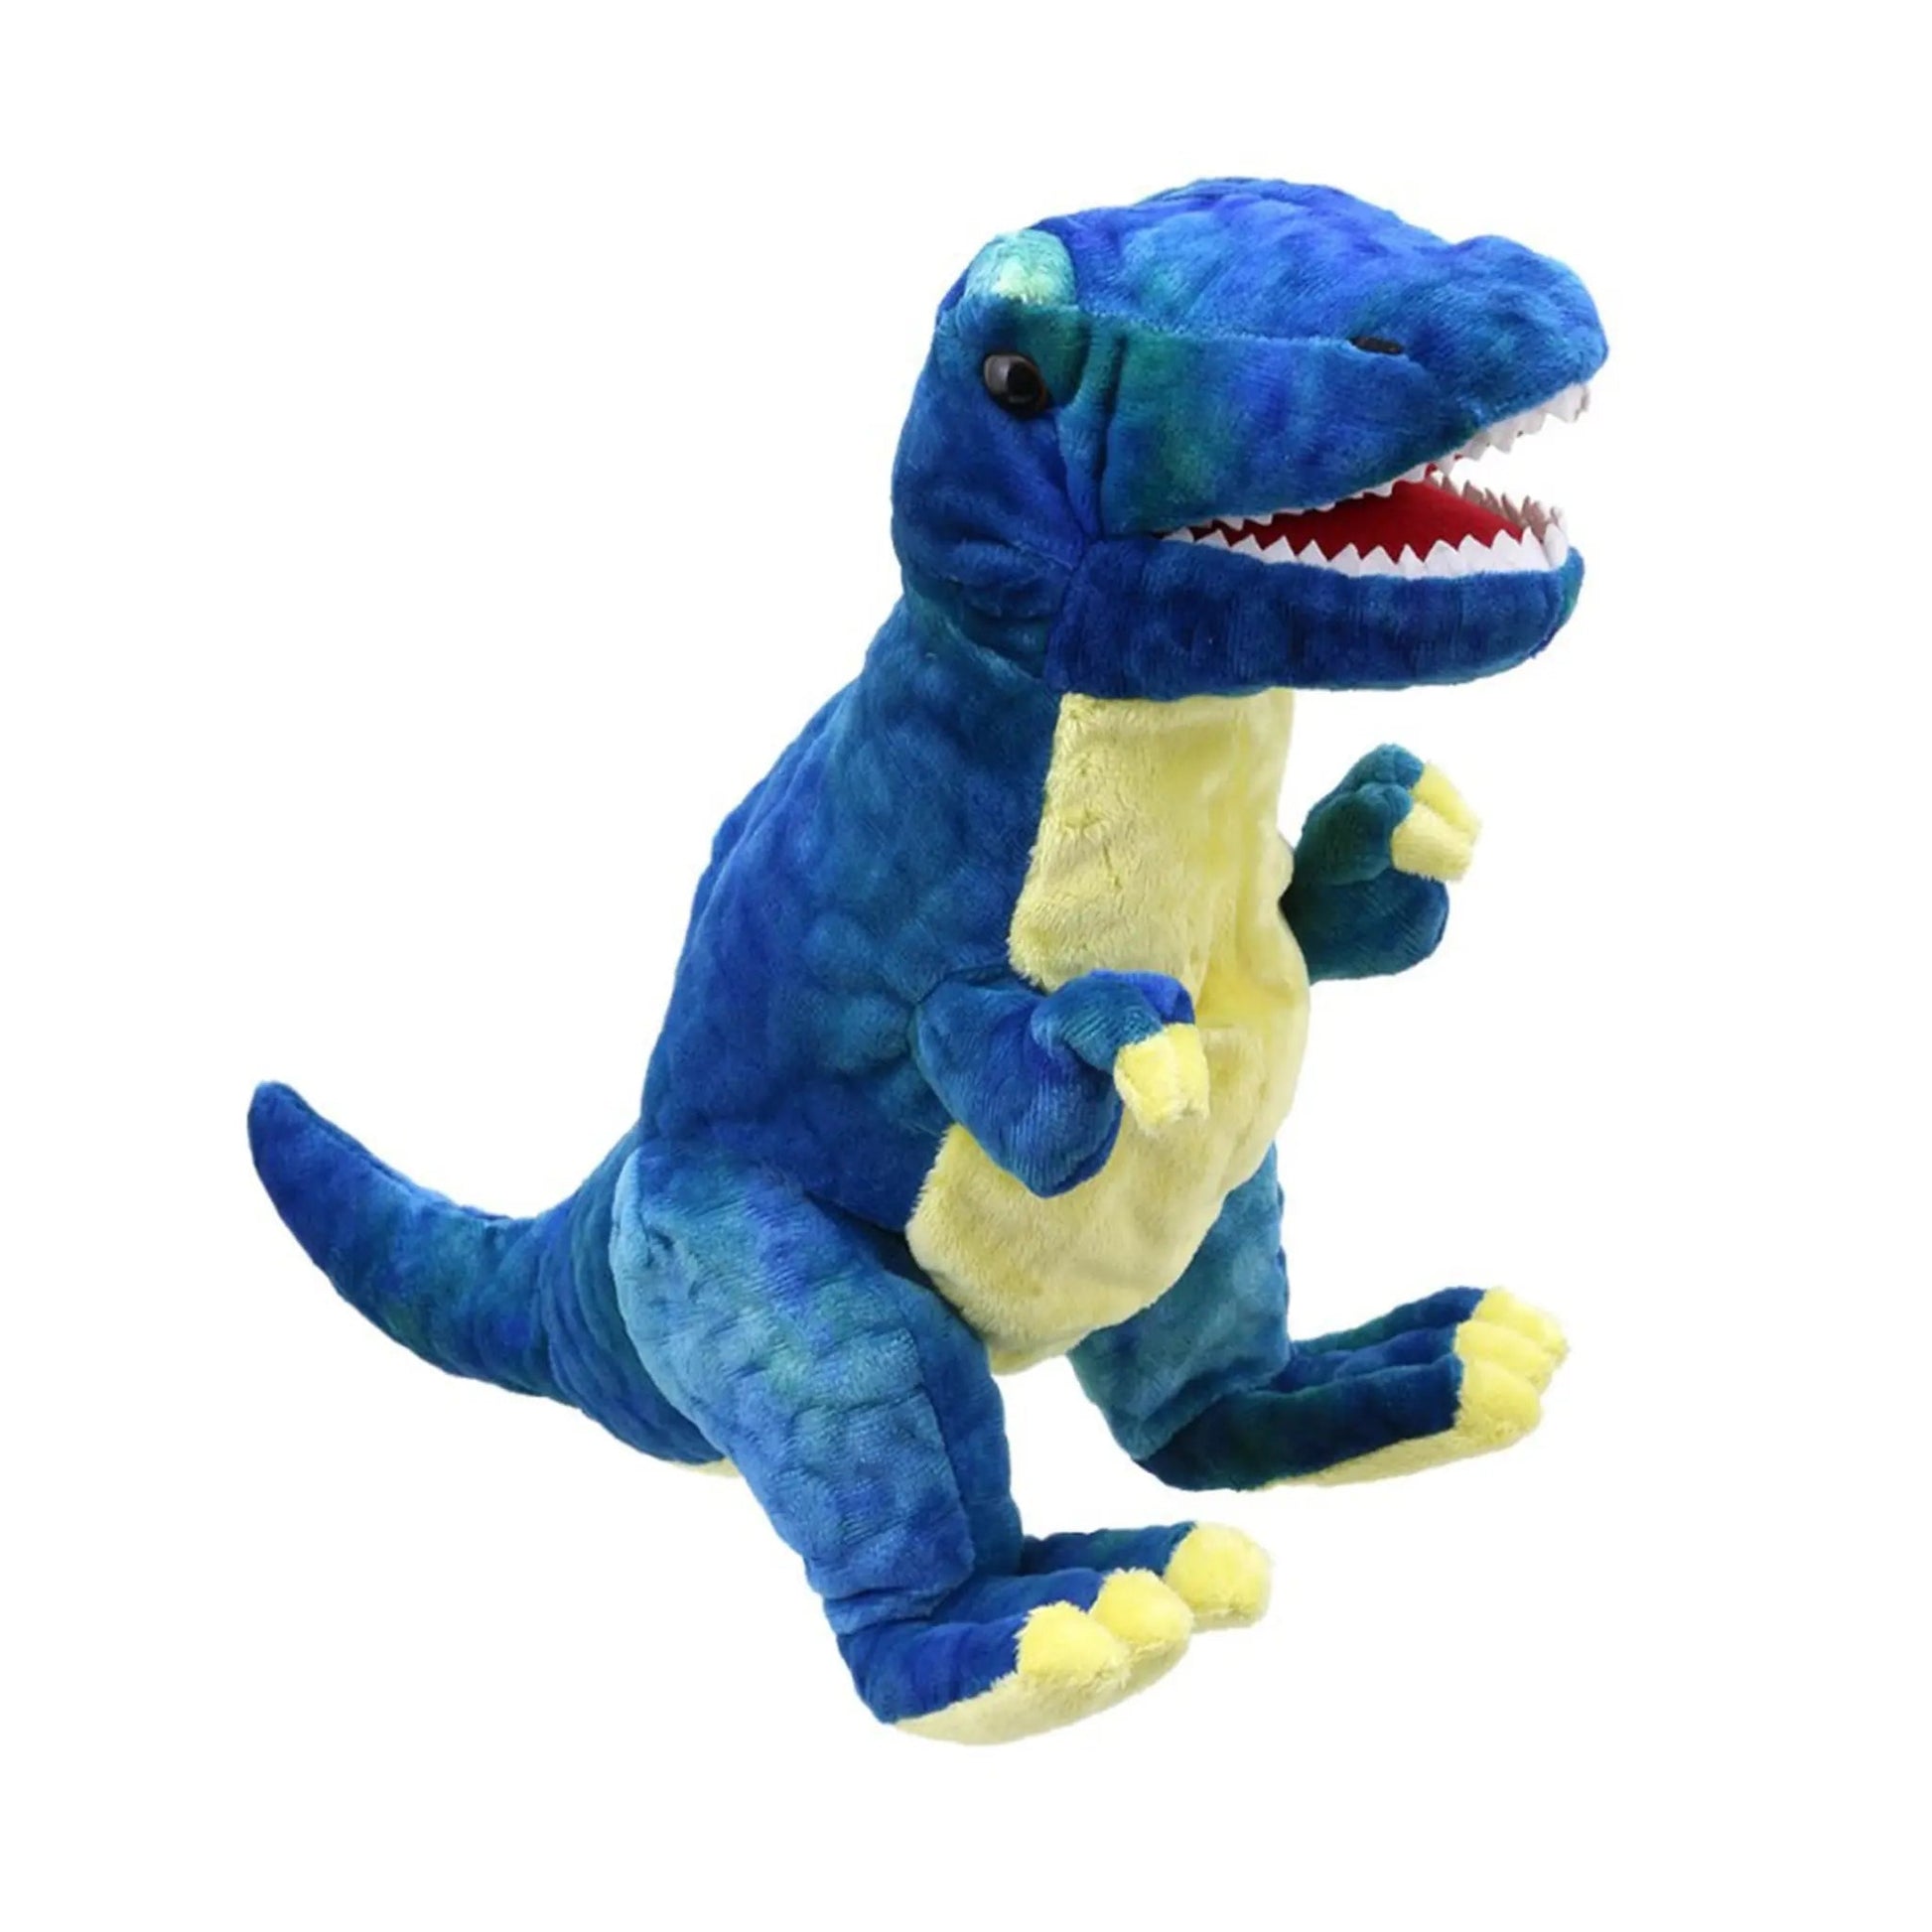 Baby Dino - T-Rex (Blue) - The Puppet Company - The Forgotten Toy Shop